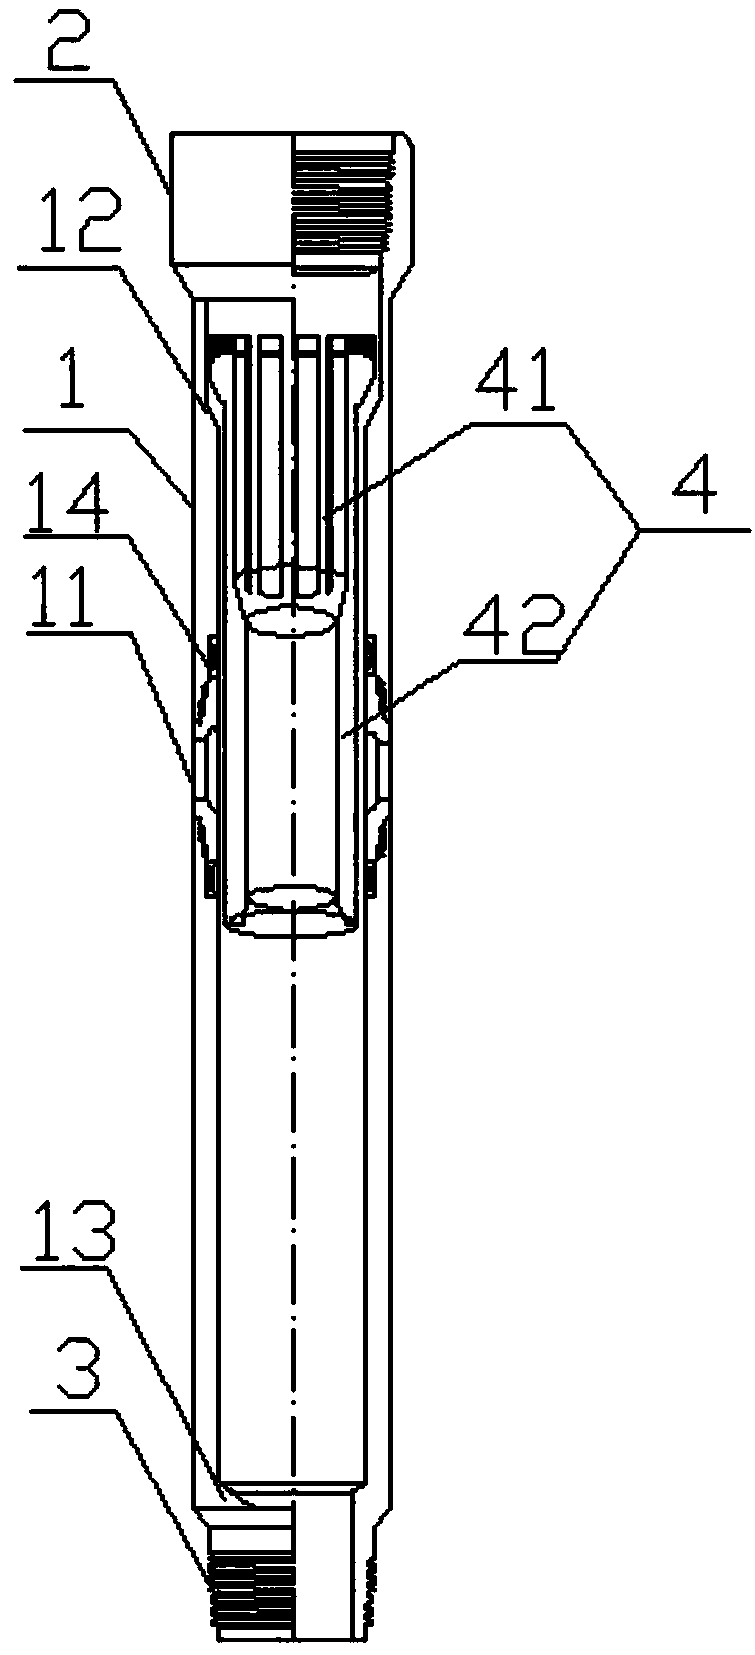 A well cementing and fracturing device